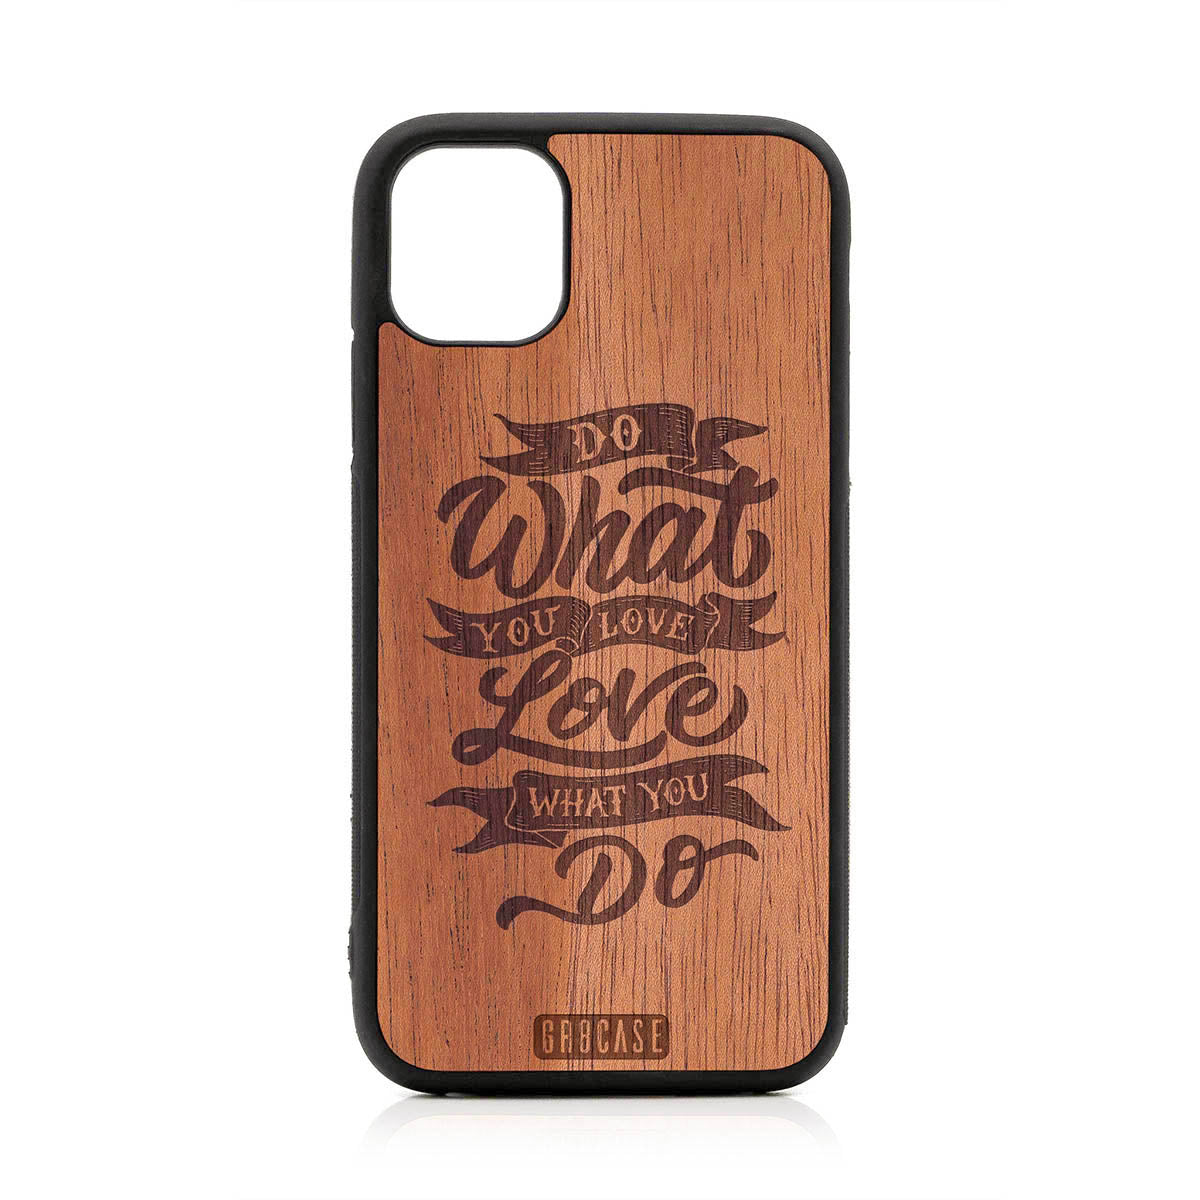 Do What You Love Love What You Do Design Wood Case For iPhone 11 by GR8CASE